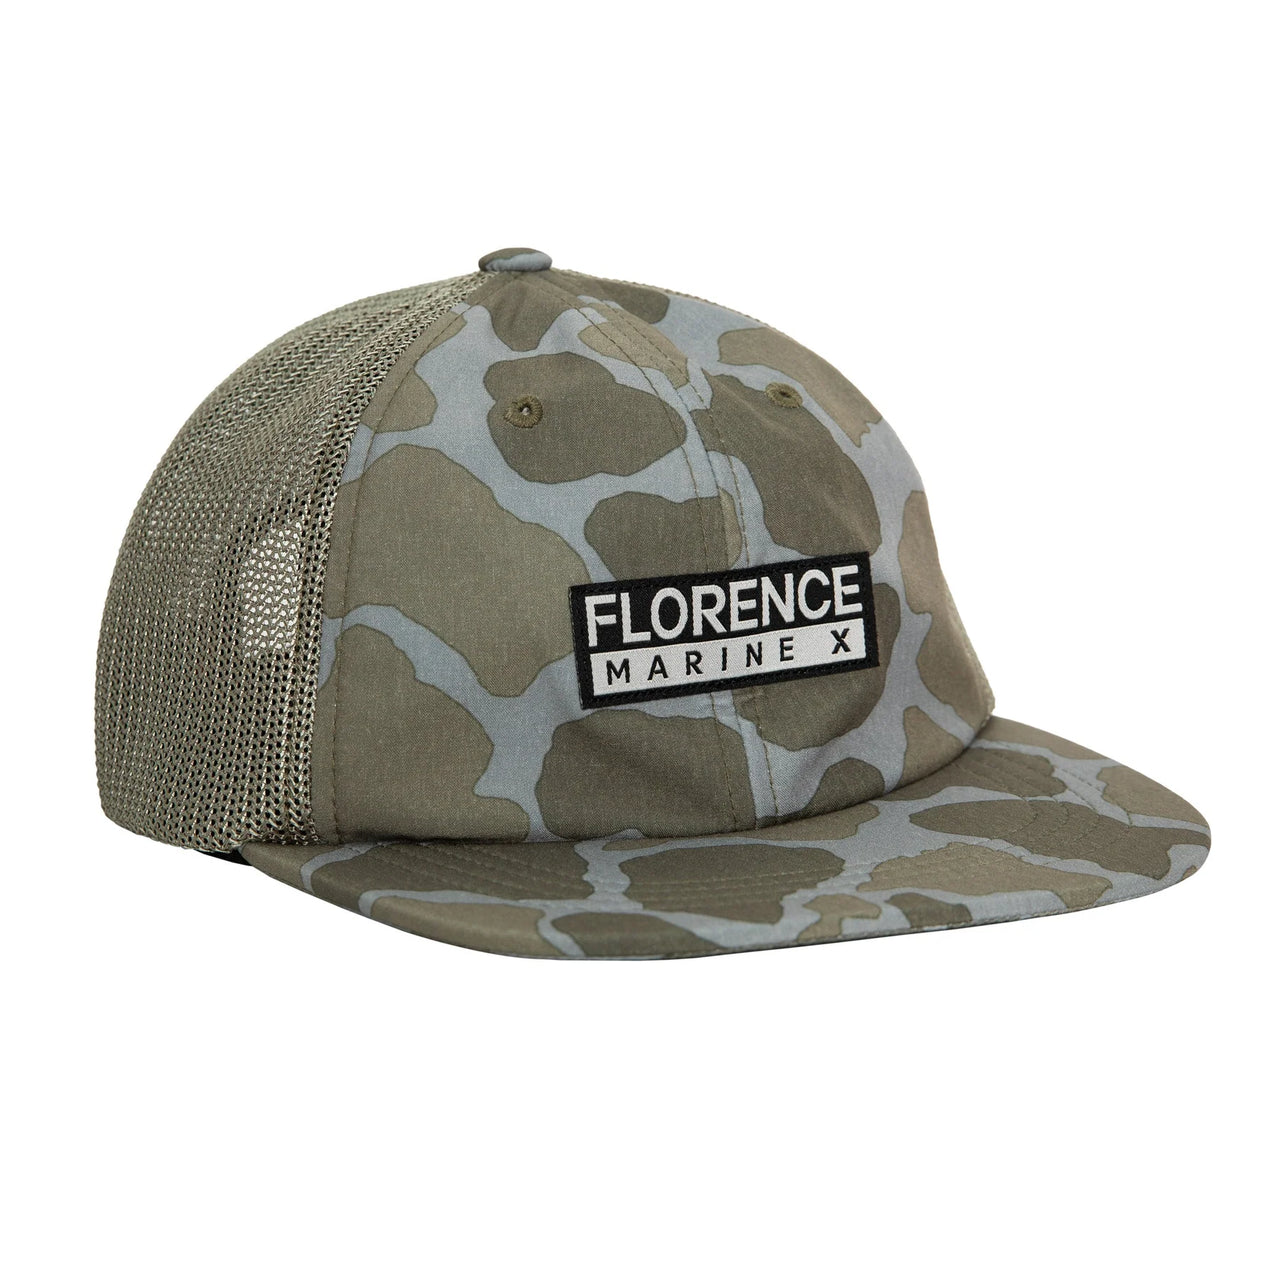 Florence Marine X - Abyss Trucker Hat